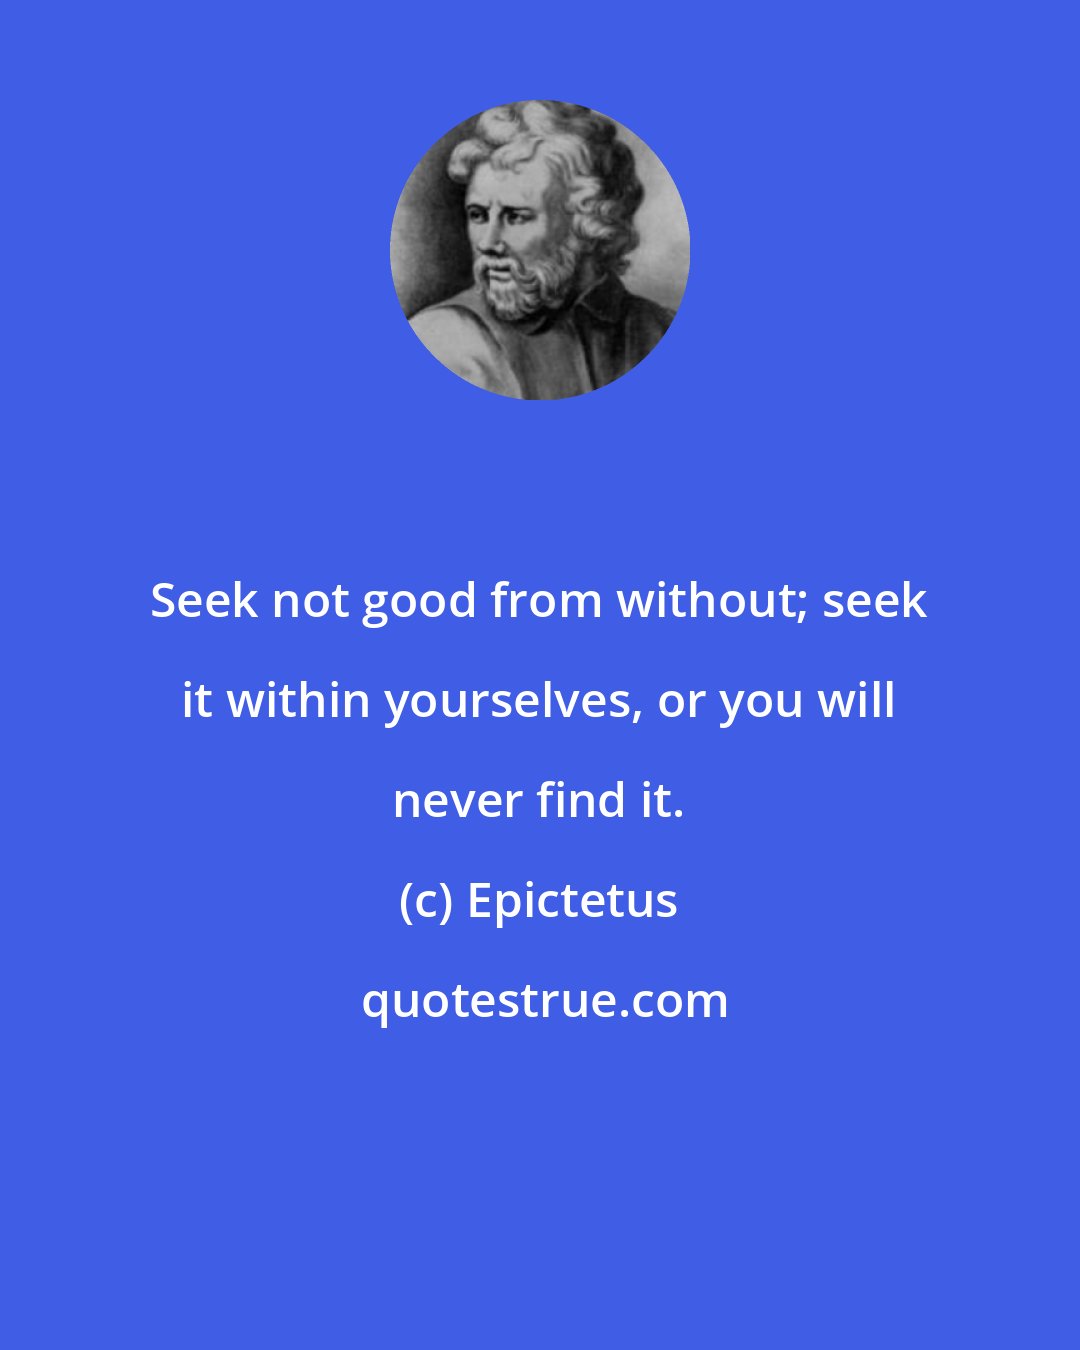 Epictetus: Seek not good from without; seek it within yourselves, or you will never find it.